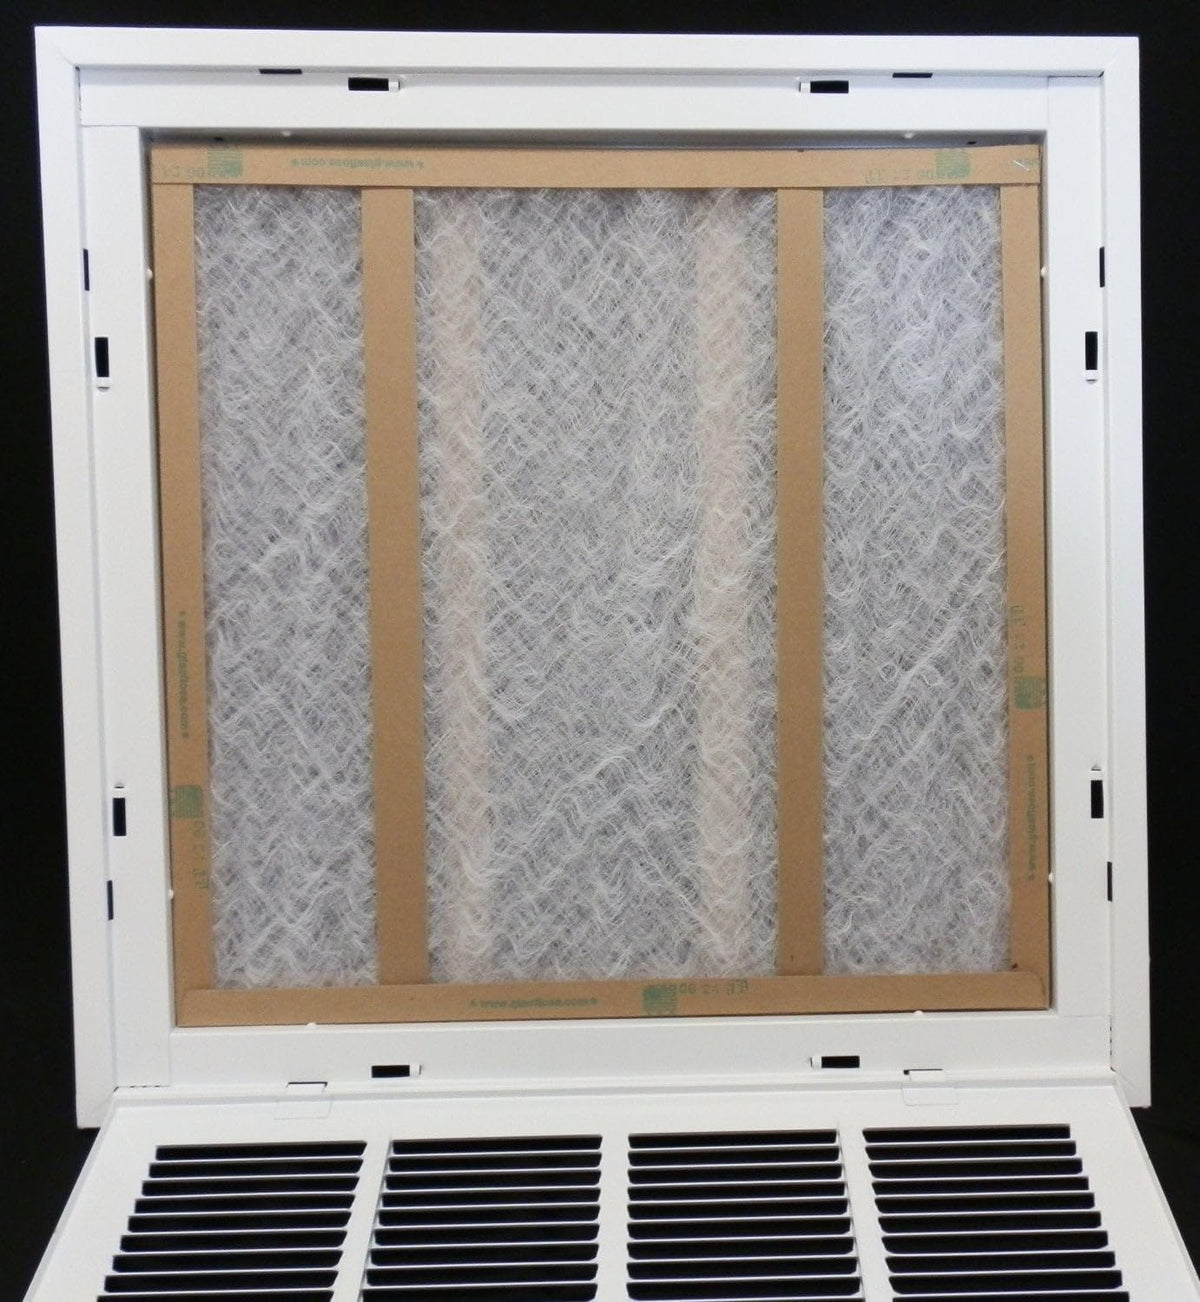 34&quot; X 36&quot; Steel Return Air Filter Grille for 1&quot; Filter - Removable Frame - [Outer Dimensions: 36 5/8&quot; X 38 5/8&quot;]